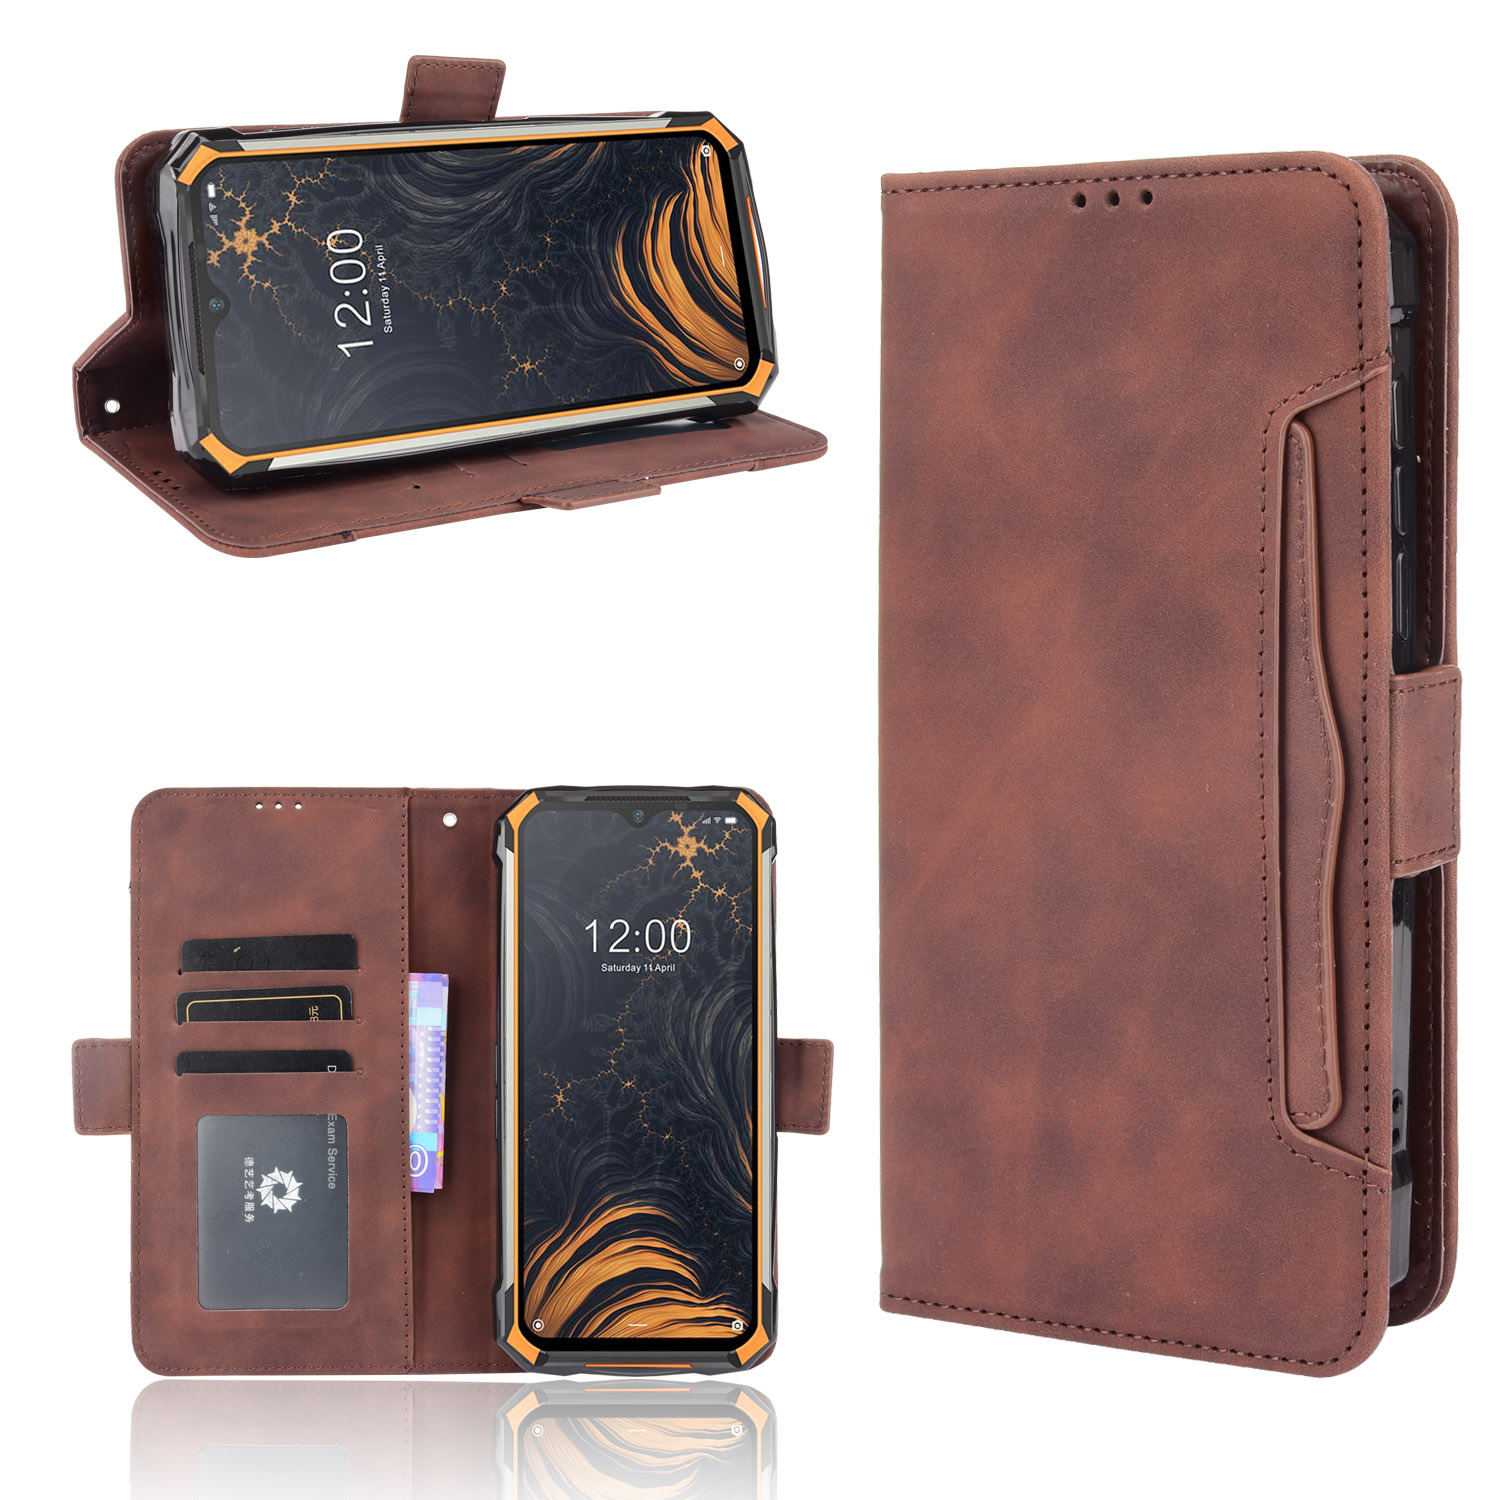 Bakeey for Doogee S88 Pro/ Doogee S88 Plus Case Magnetic Flip with Multiple Card Slot Wallet Folding Stand PU Leather Shockproof Full Cover Protective Case